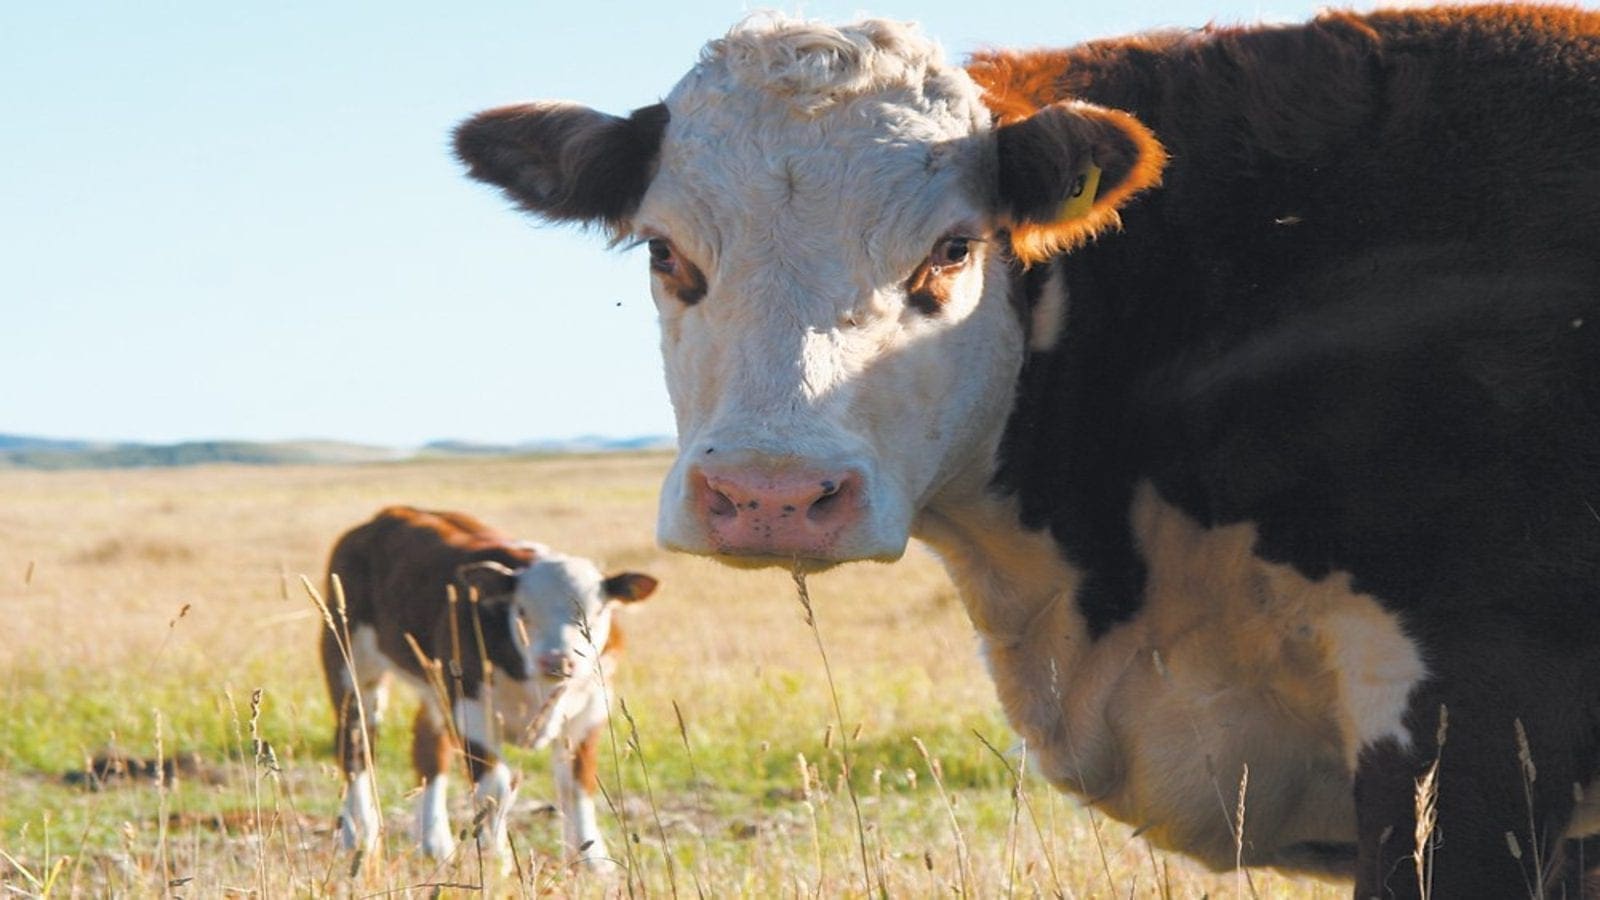 Nestlé partners Grassroots Carbon to decarbonize beef supply chain